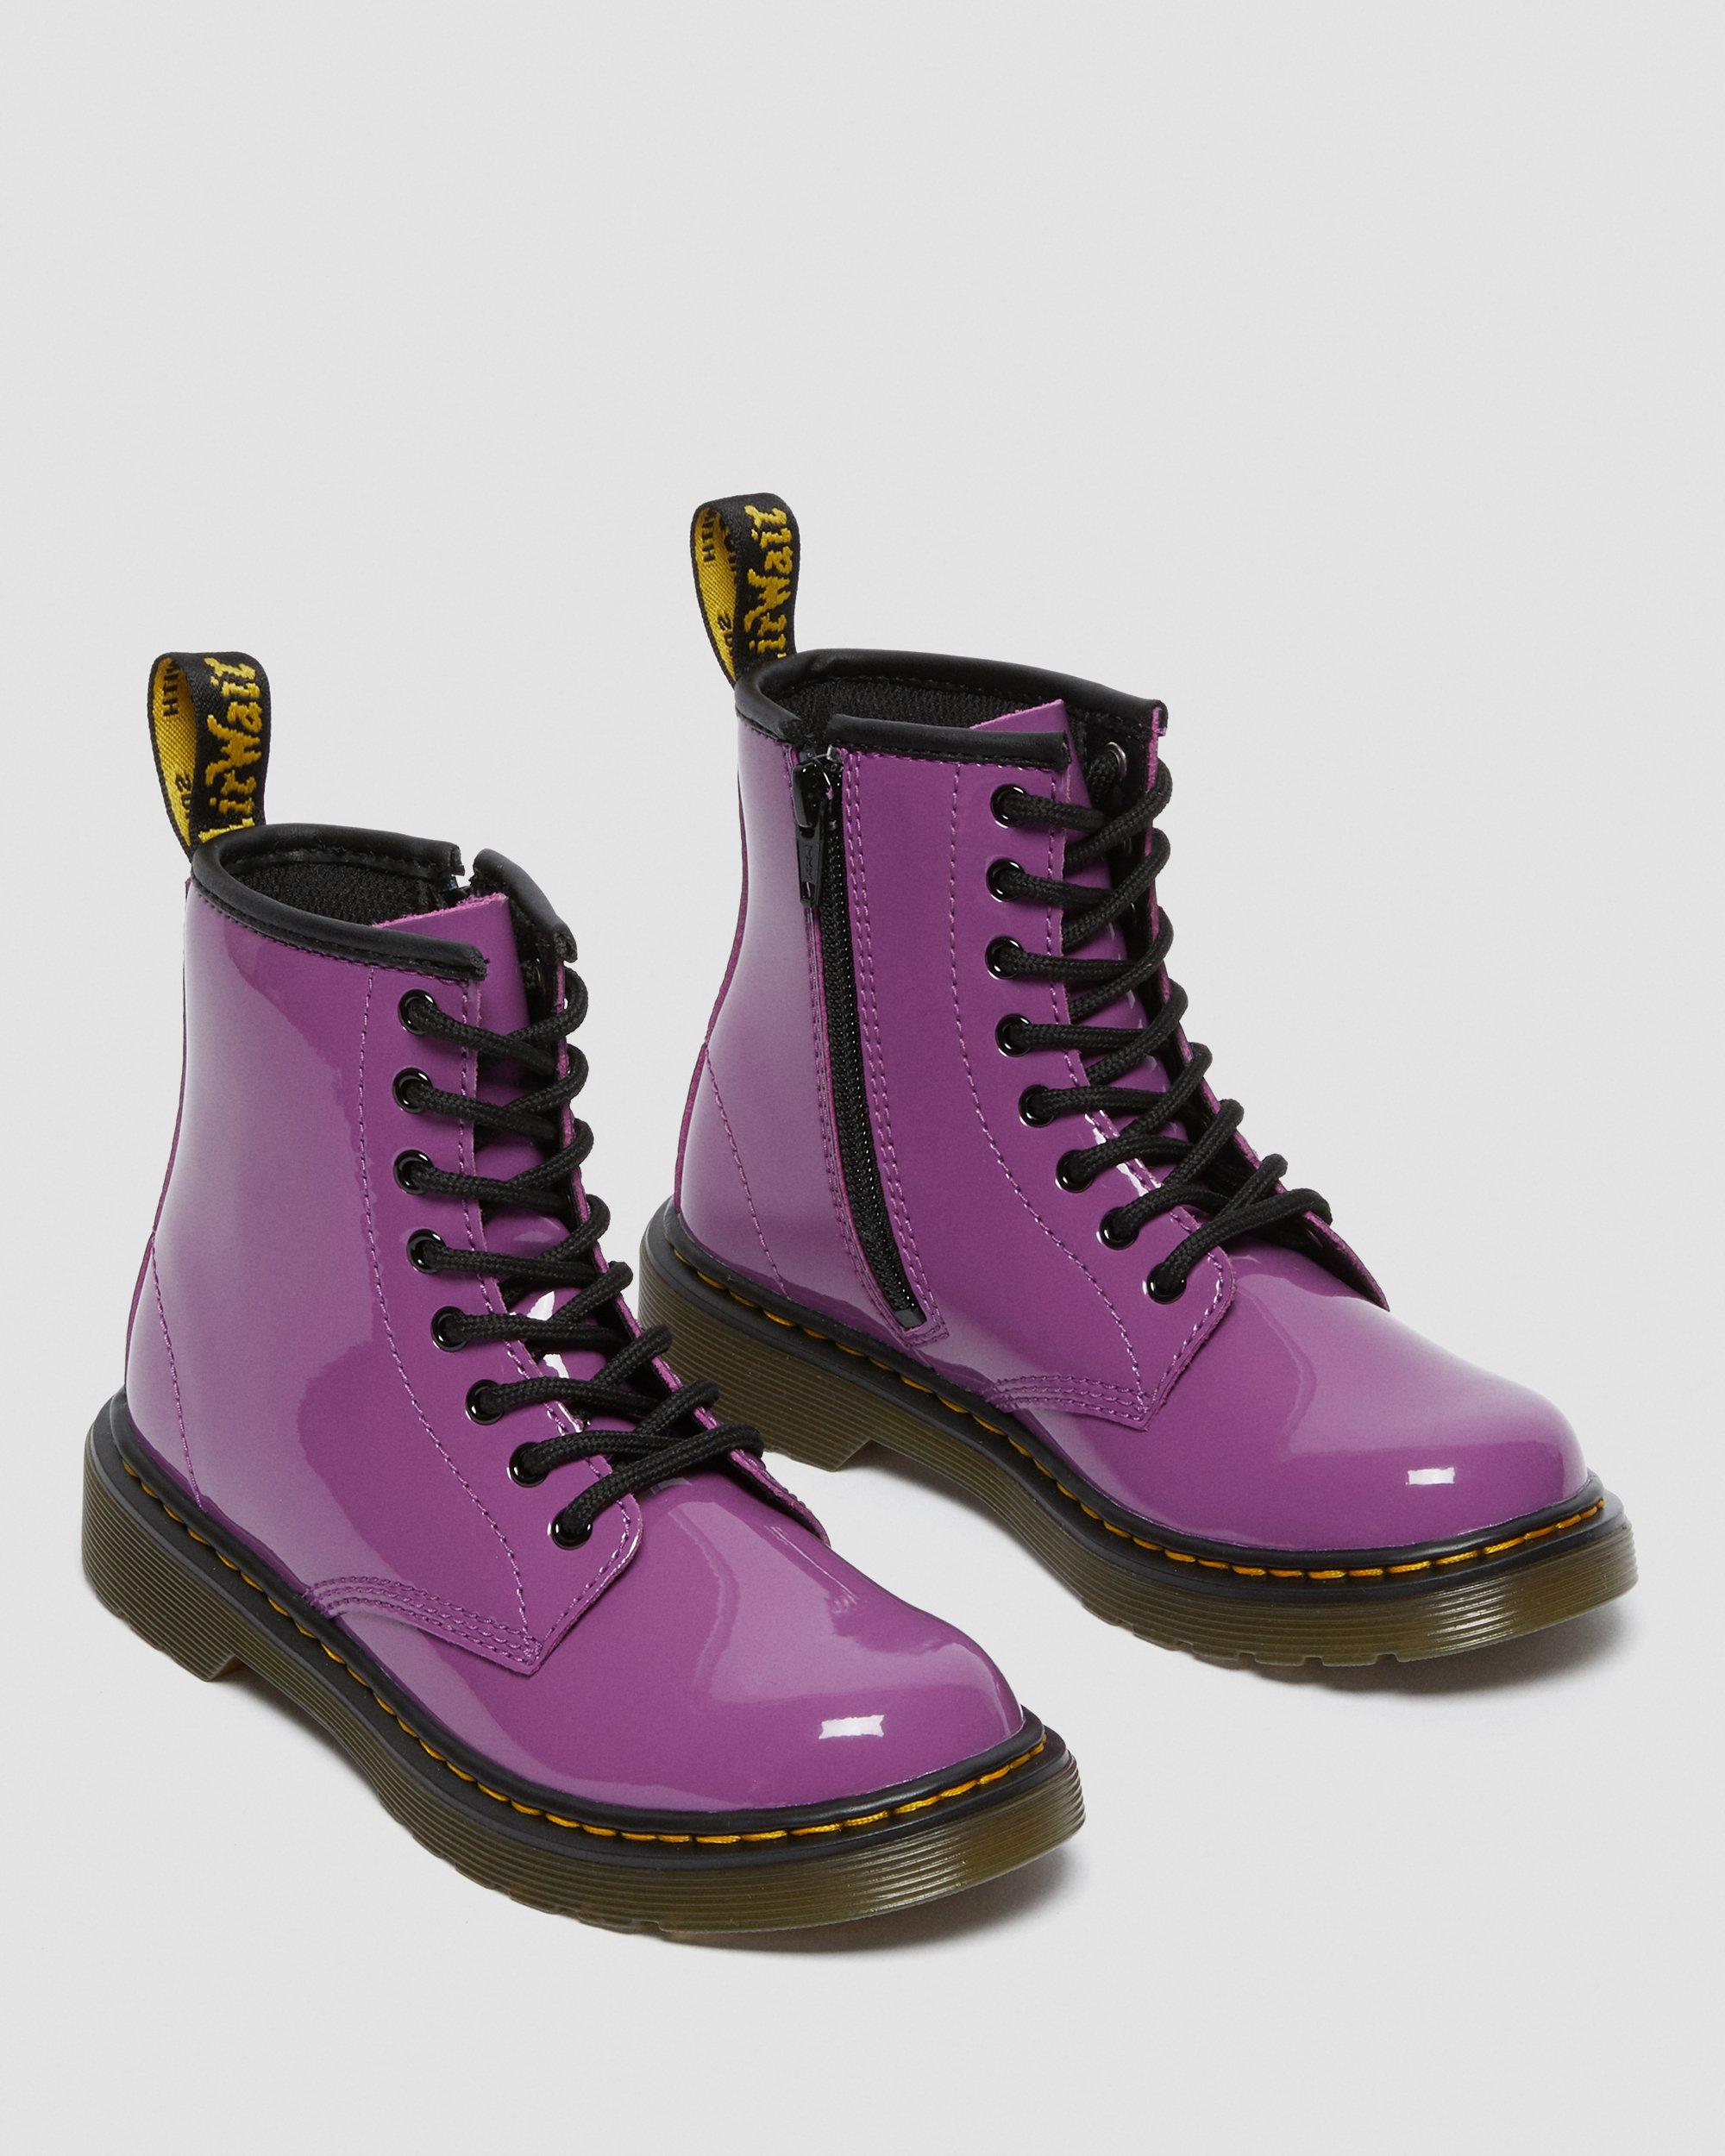 Junior 1460 Patent Leather Lace Up Boots in Purple